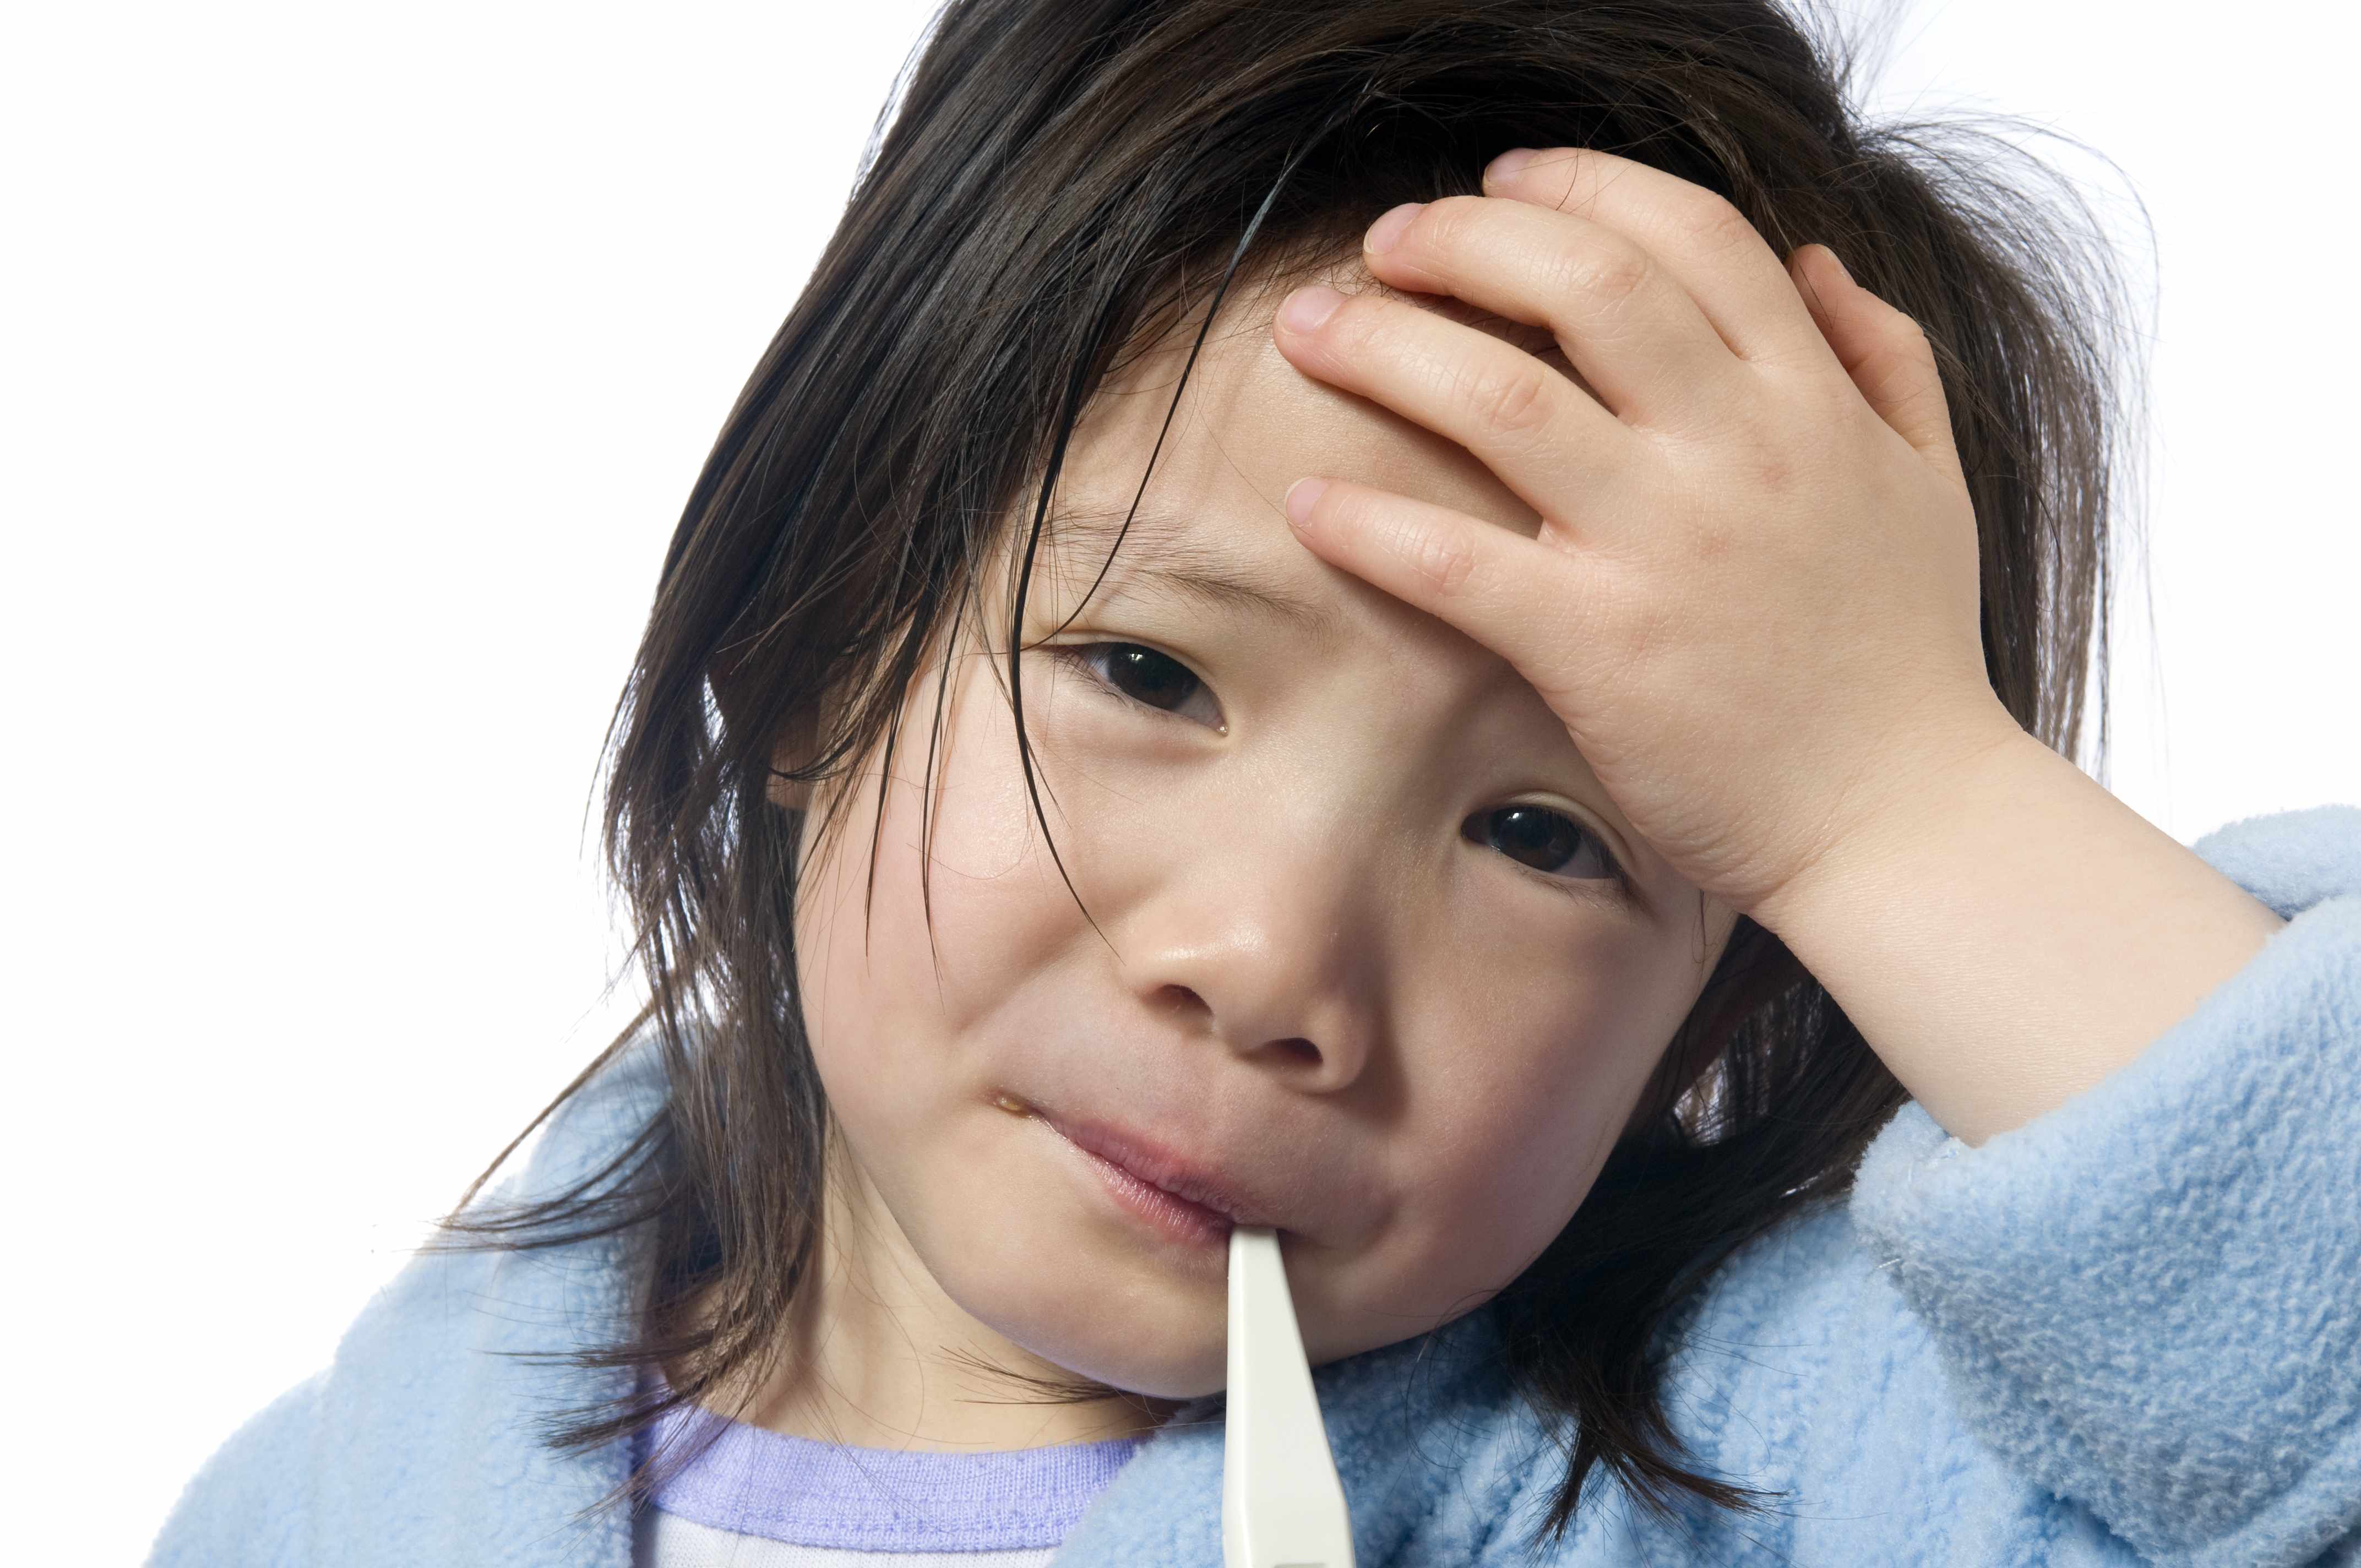 A pediatric fever is a very generic term that often needs further qualification (source)